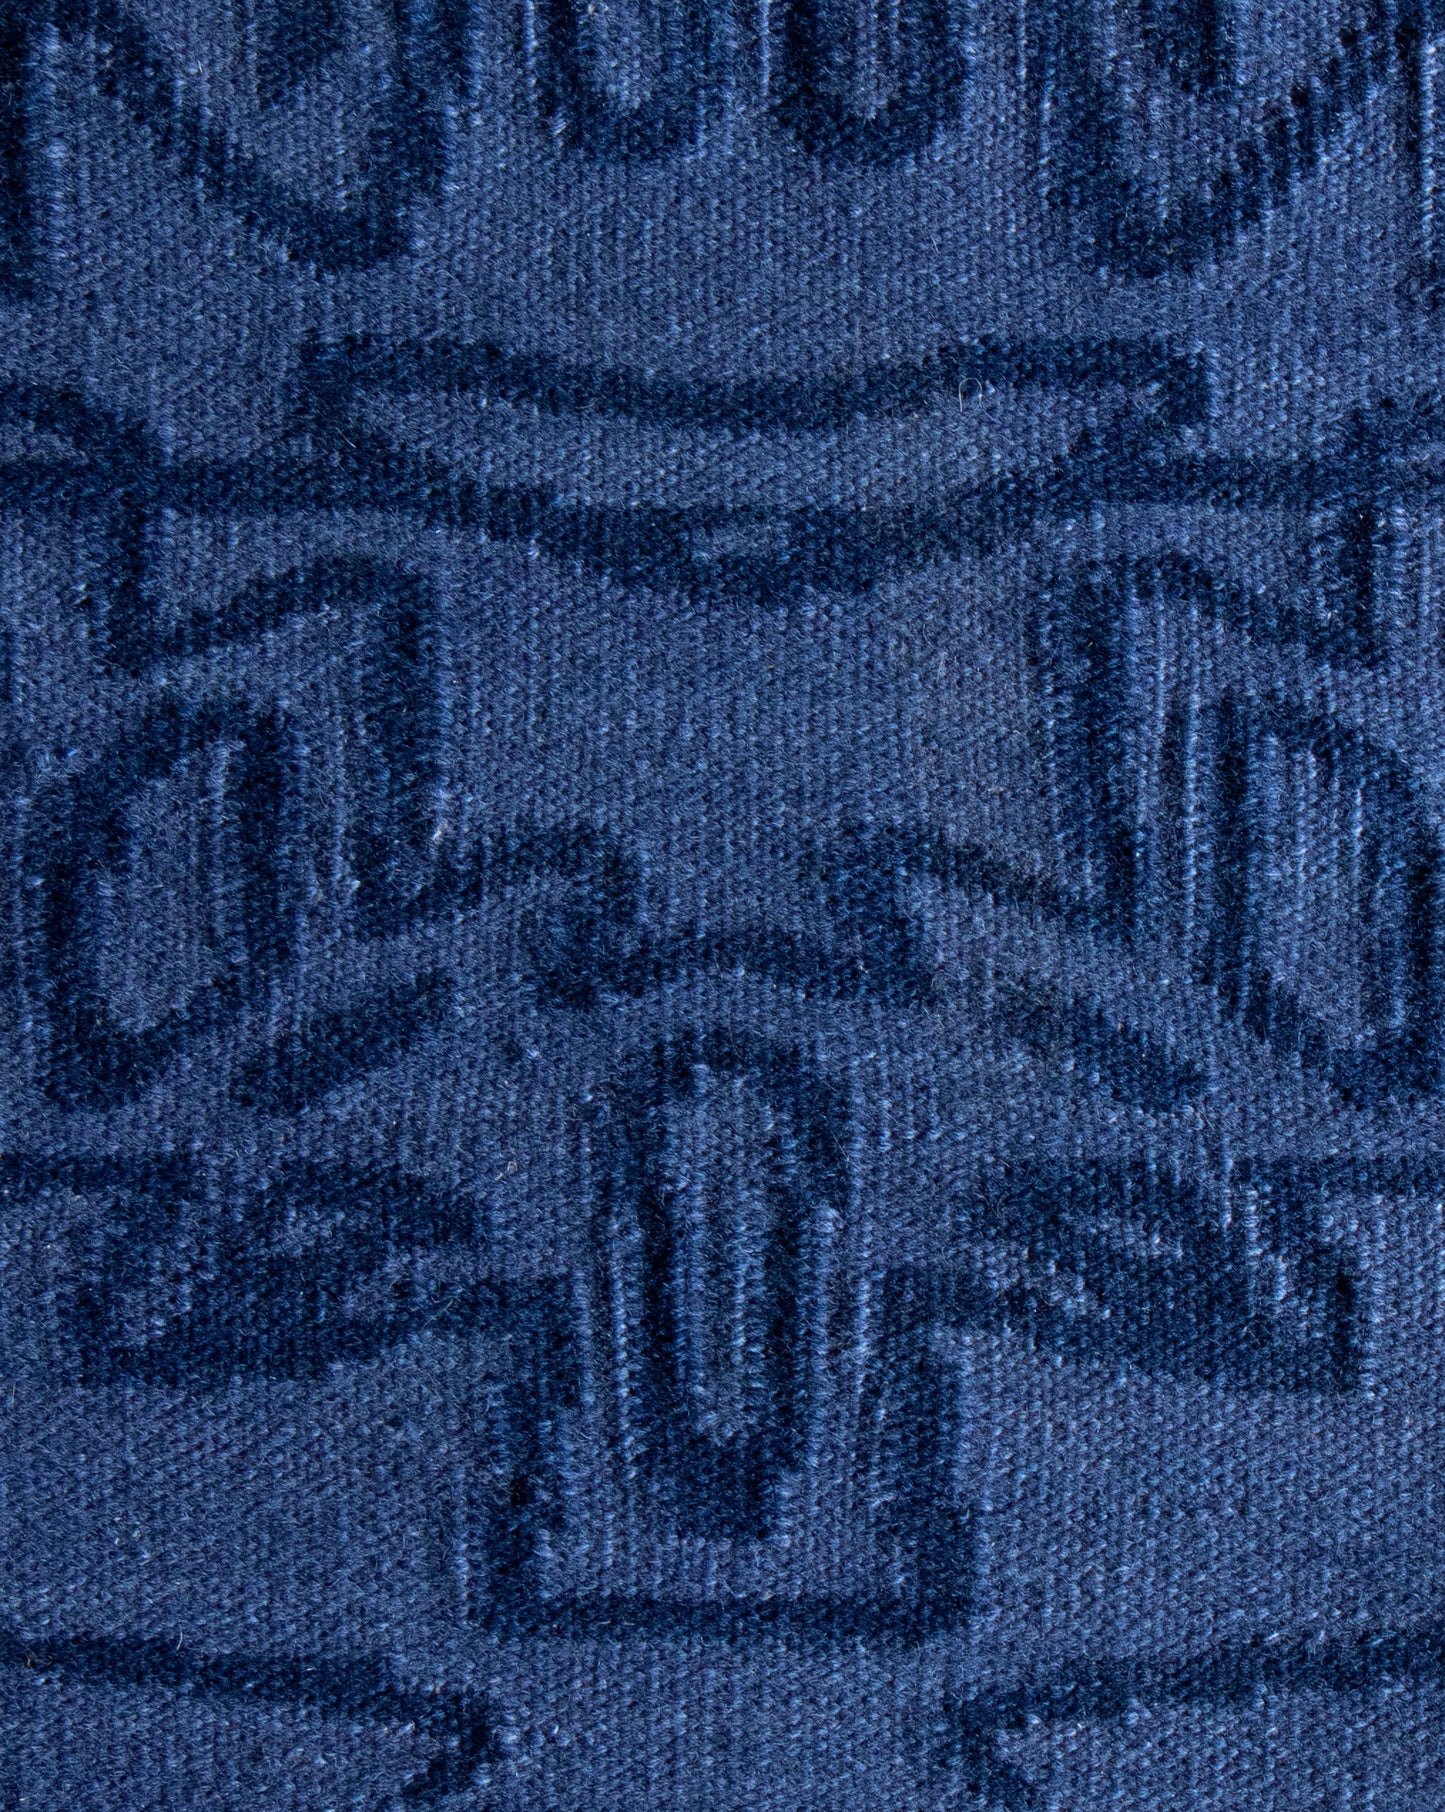 A close up of a blue fabric with an Akimbo 5 Flatweave Rug Indigo Inverse design on it